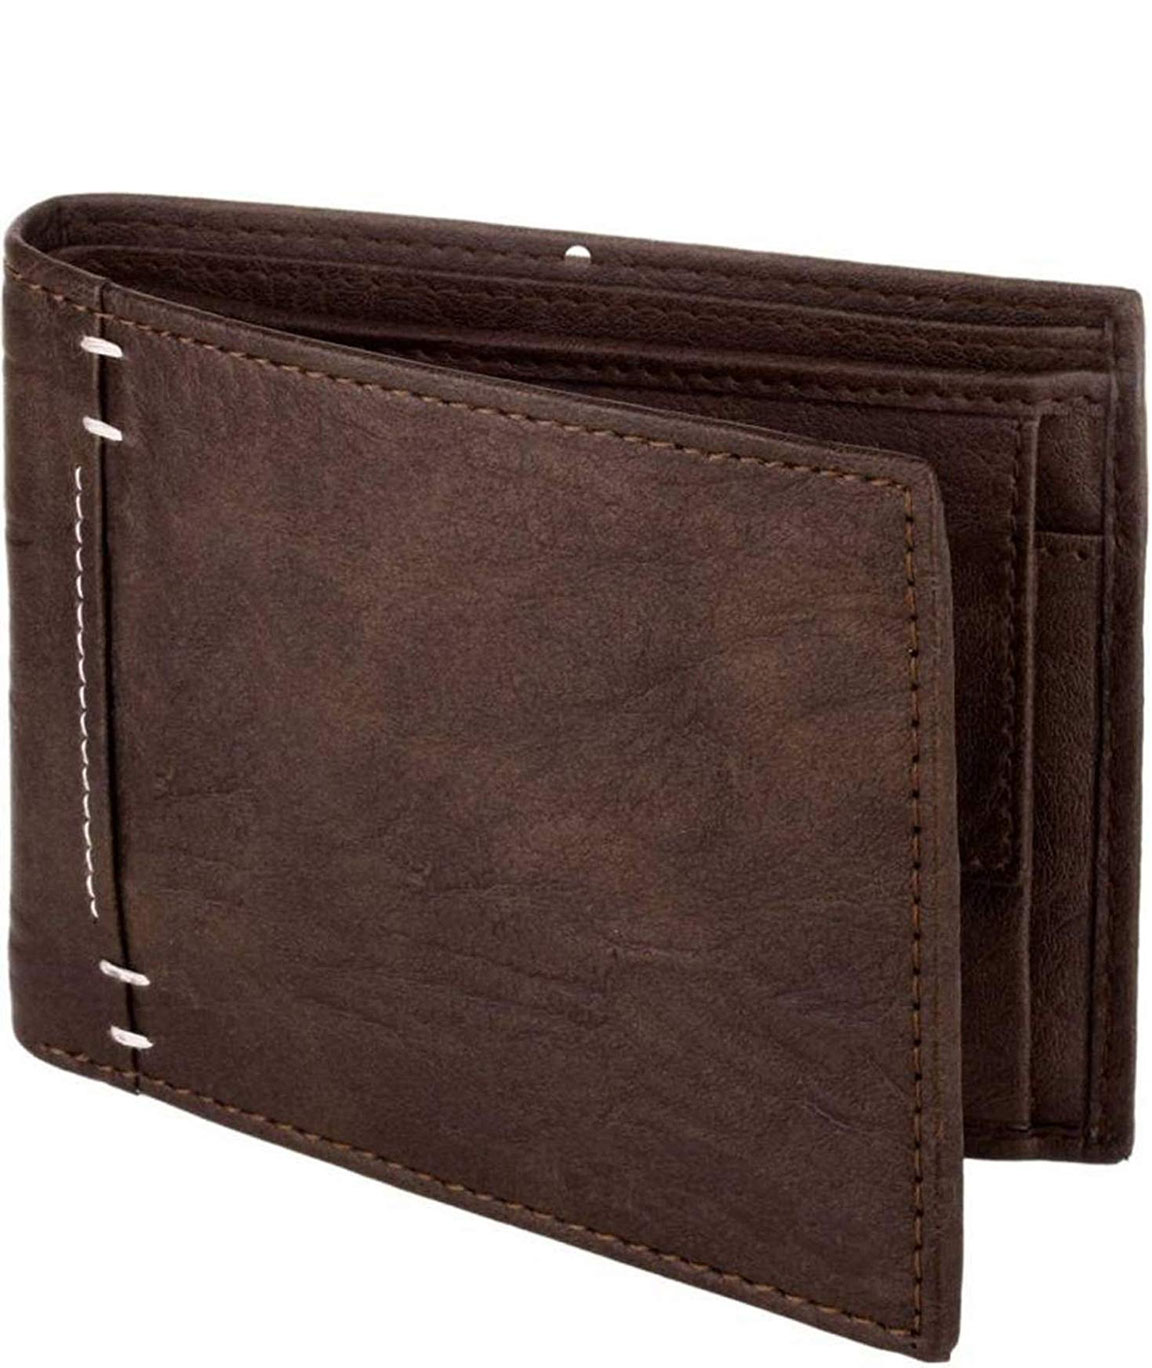 5 of the Best Luxury Wallets for Discerning Gents - Barrington